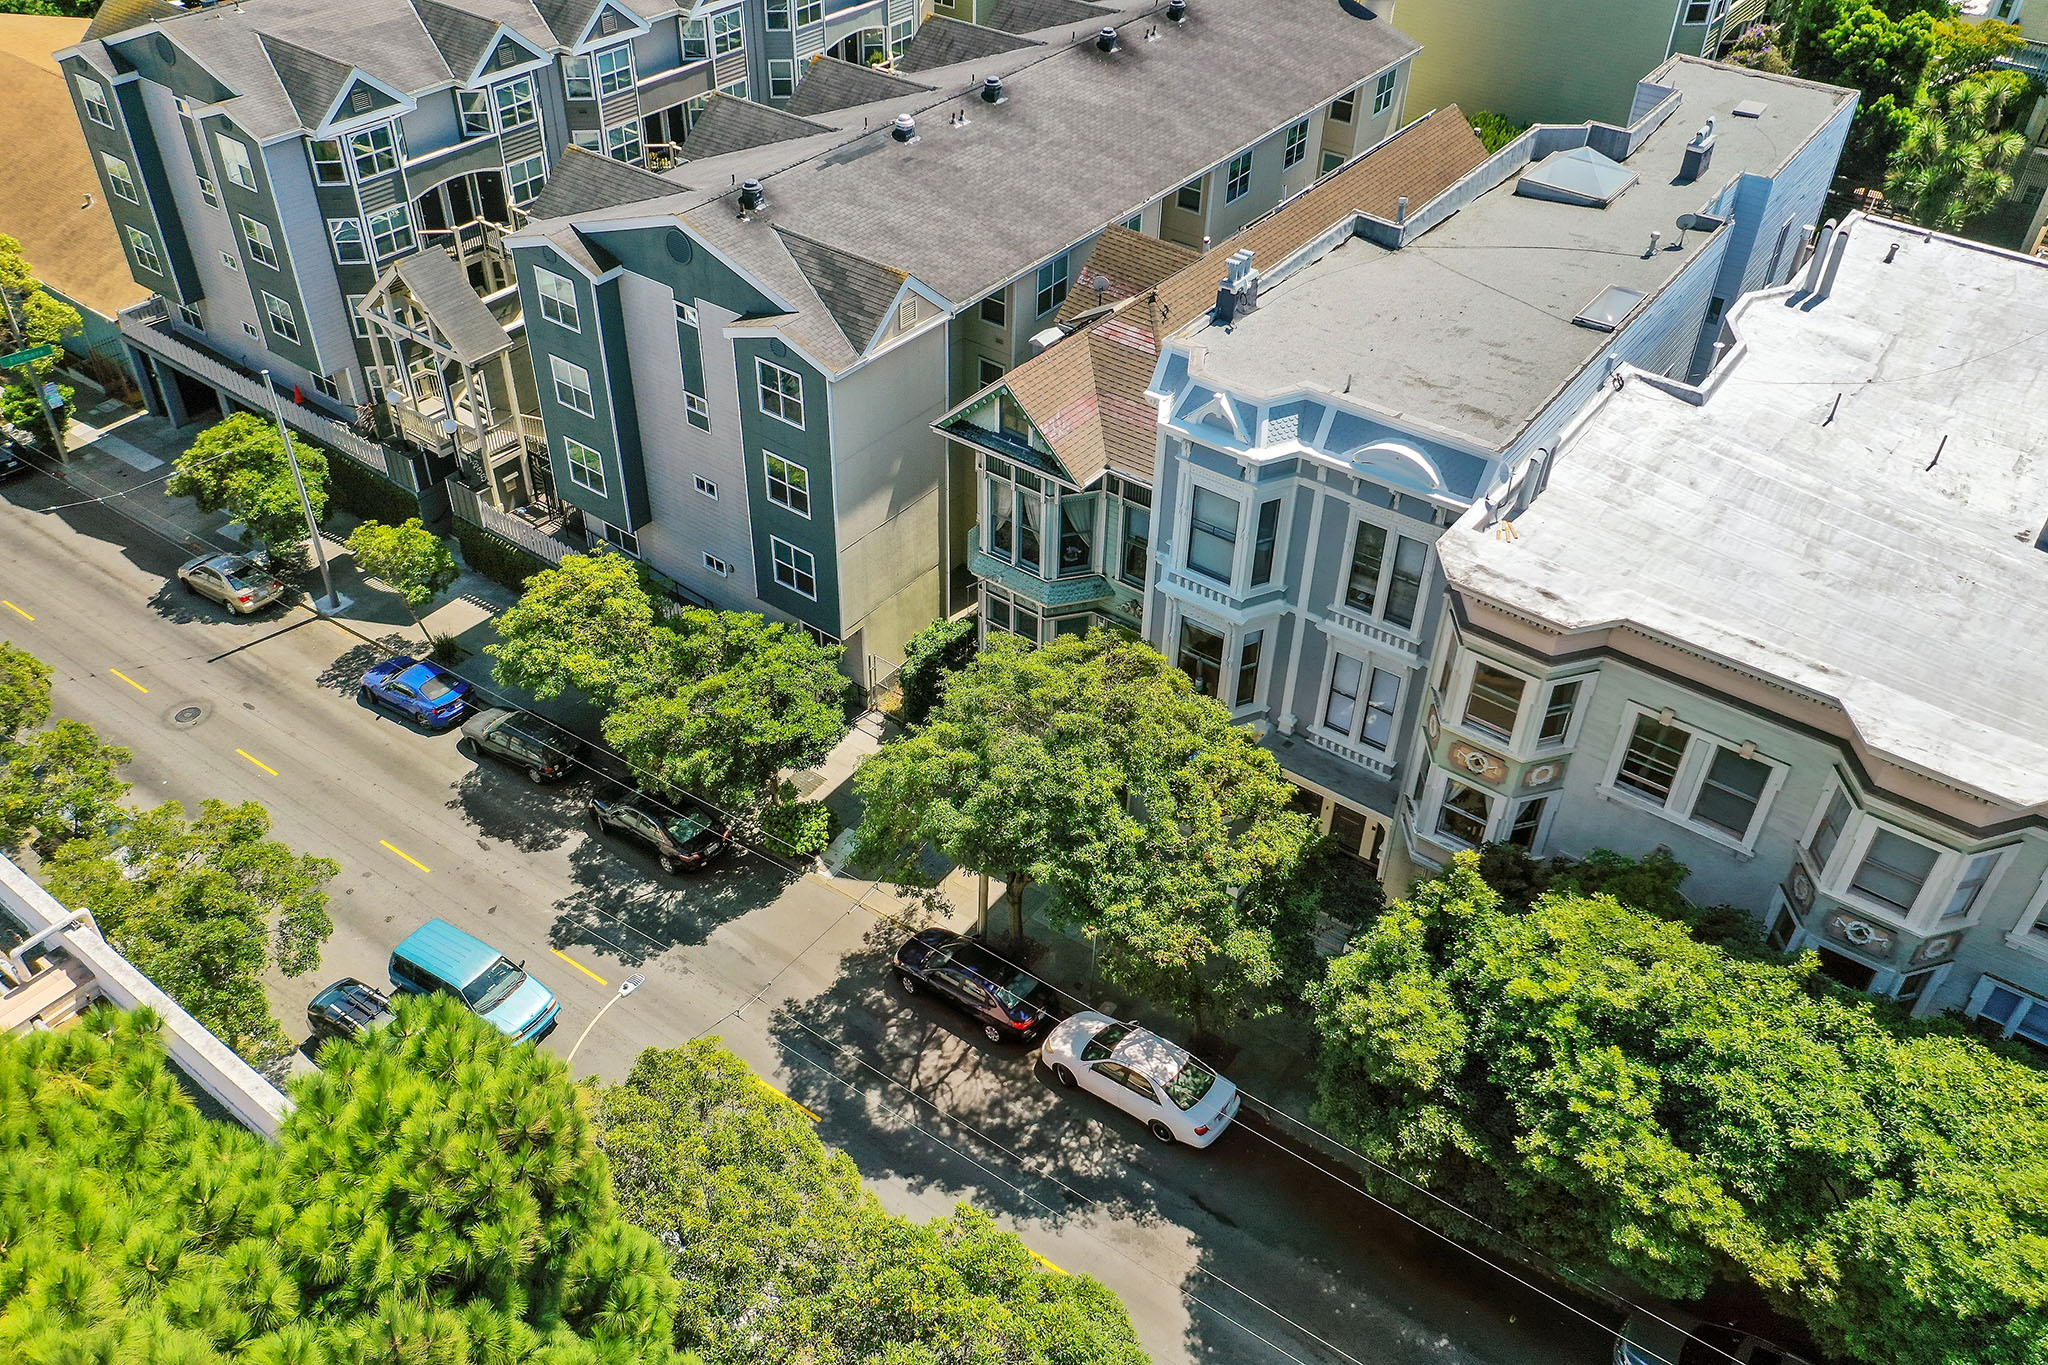 Property Photo: Aerial view of 1271 McAllister Street, showing the surround homes and tree lined street